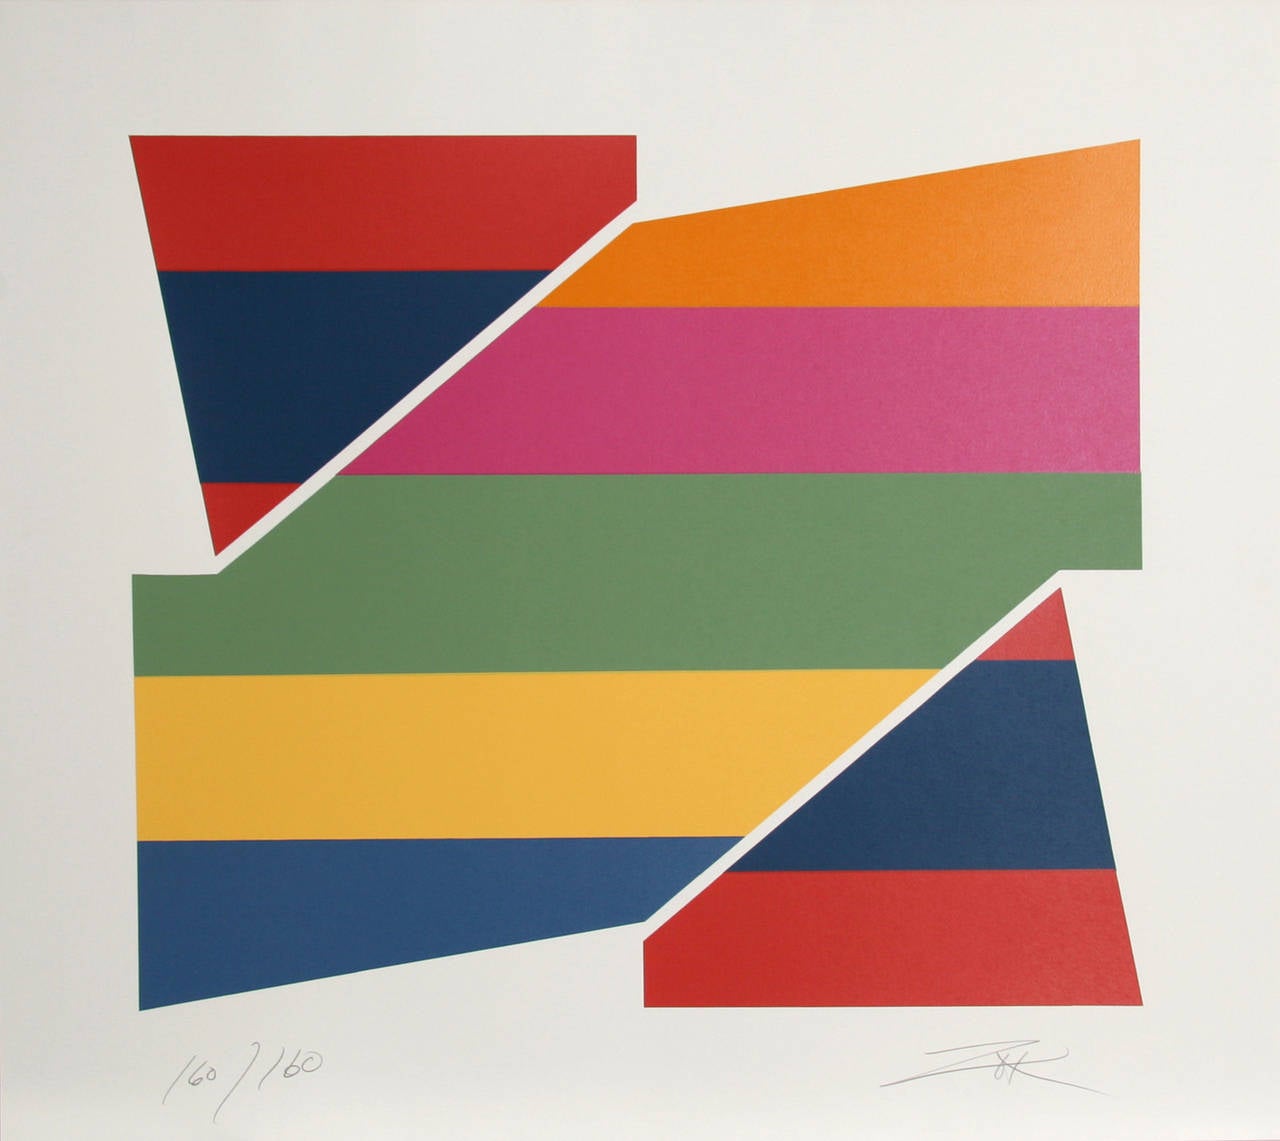 Artist: Larry Zox
Title: Rotation I
Year: 1978
Medium: Serigraph, signed and numbered in pencil 
Edition: 160
Paper Size: 34 x 38 inches [86.36 x 96.52 cm]